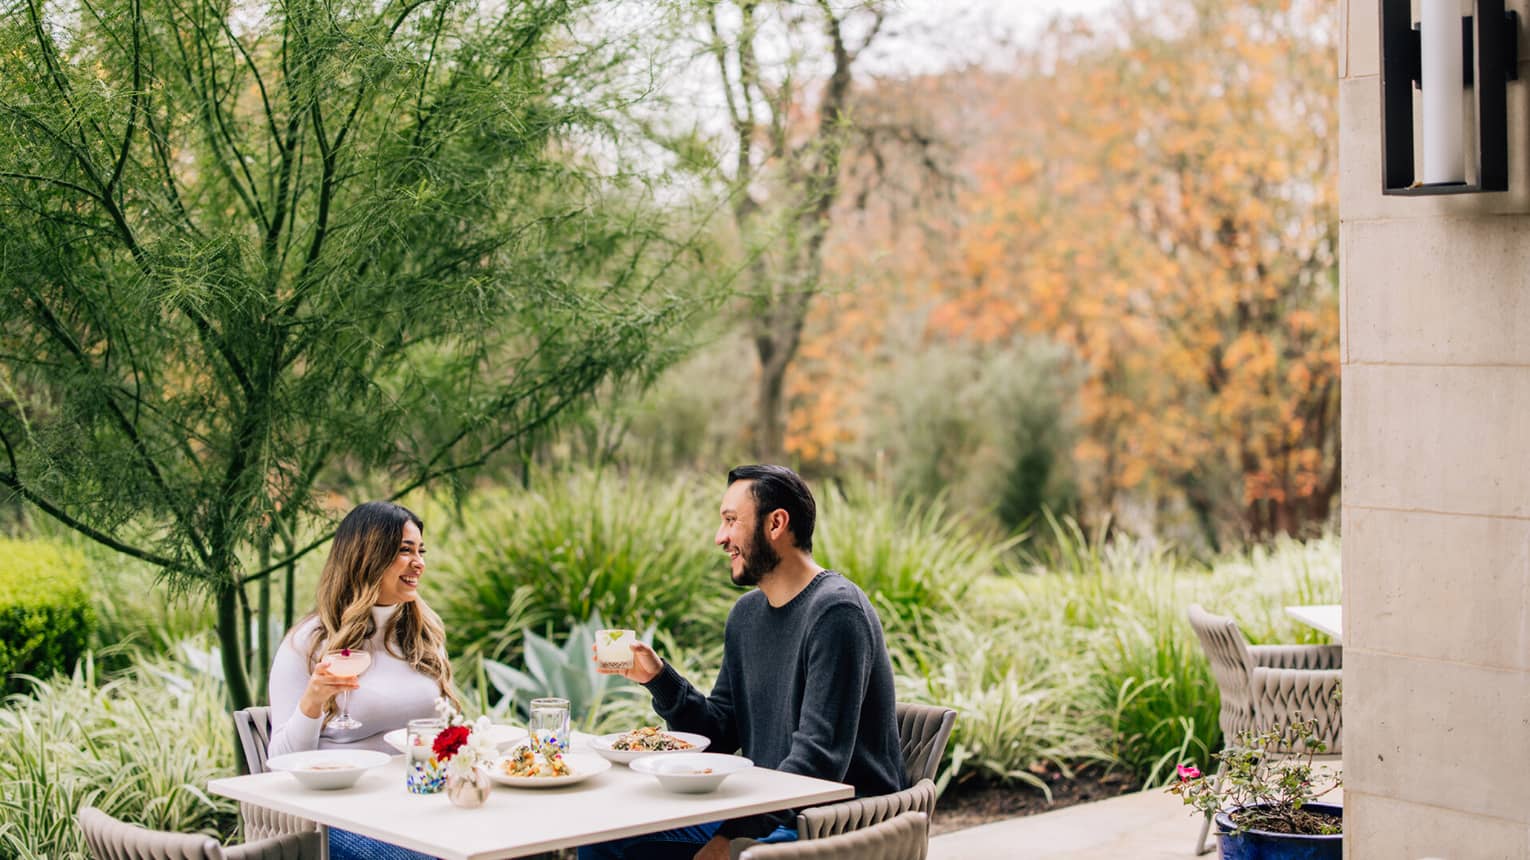 A couple sits at an outdoor dining table enjoying a meal and cocktails, surrounded by trees and greenery